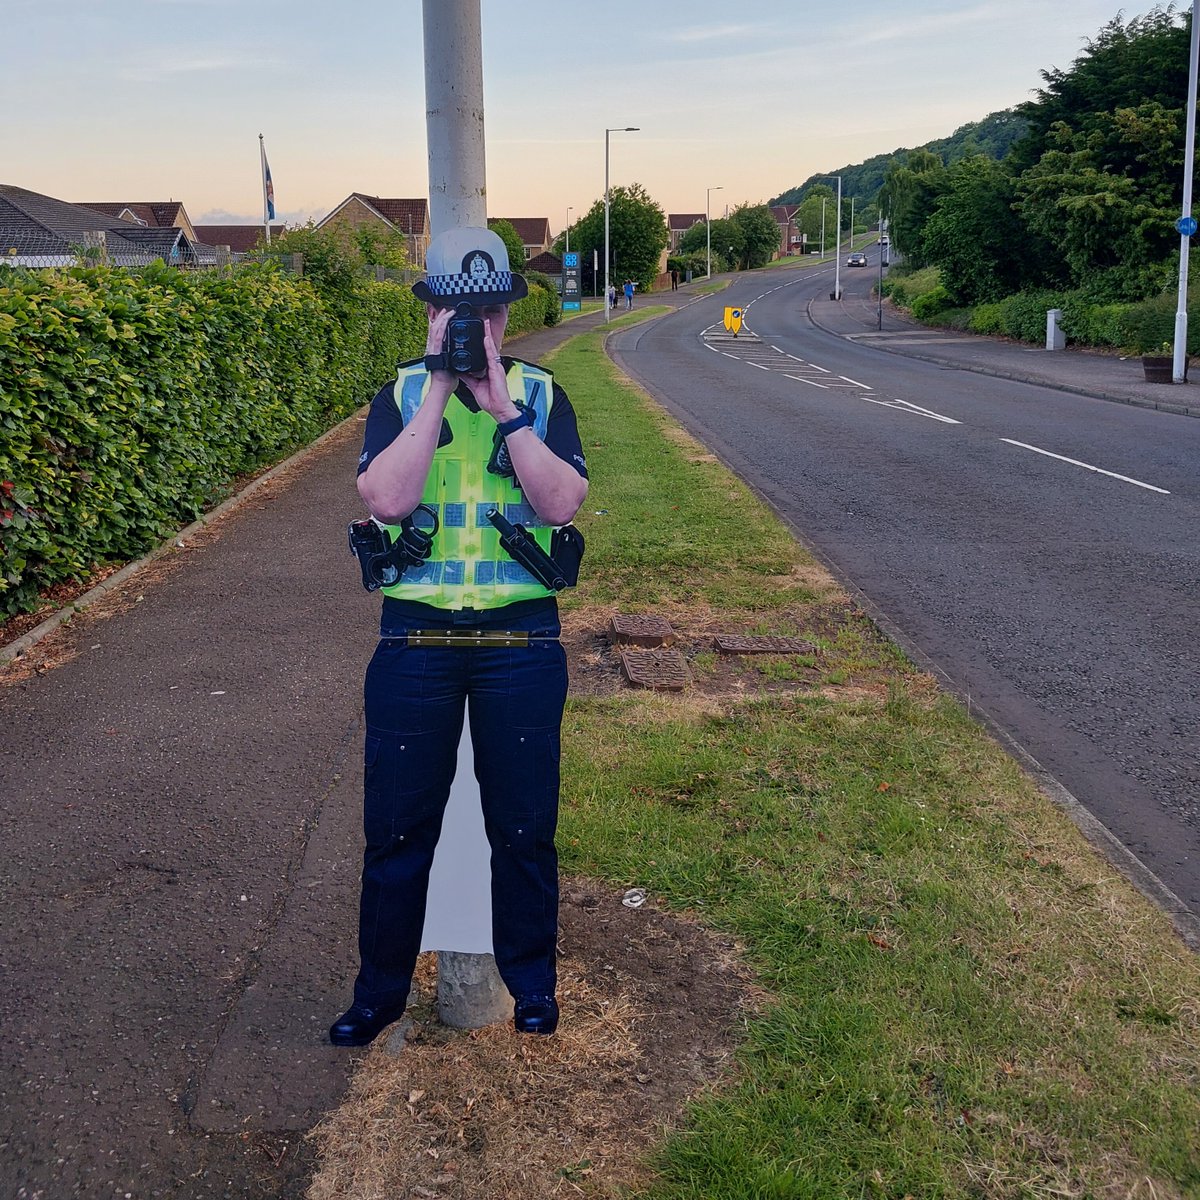 One of our pop-up police officers on patrol on Harbour Drive, Dalgety Bay, after reports of a vehicle doing an emergency stop from high speed this morning. If you saw it, incident 2094 of 13th June refers. We'll be there next time...

#SlowDown
#DalgetyBay